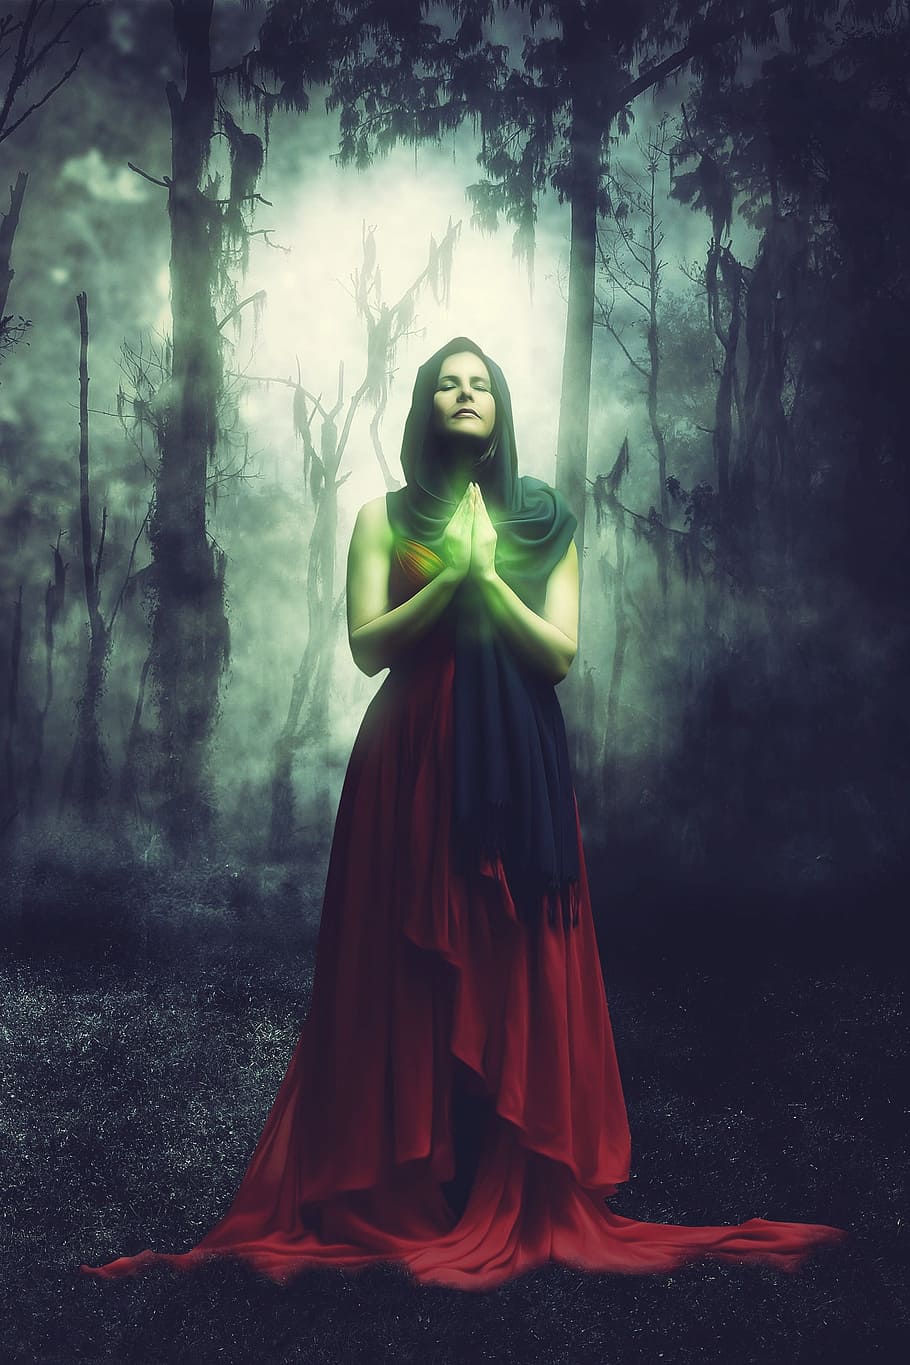 woman, red, dress, praying, fantasy, forest, magic, surreal, artistic, nature